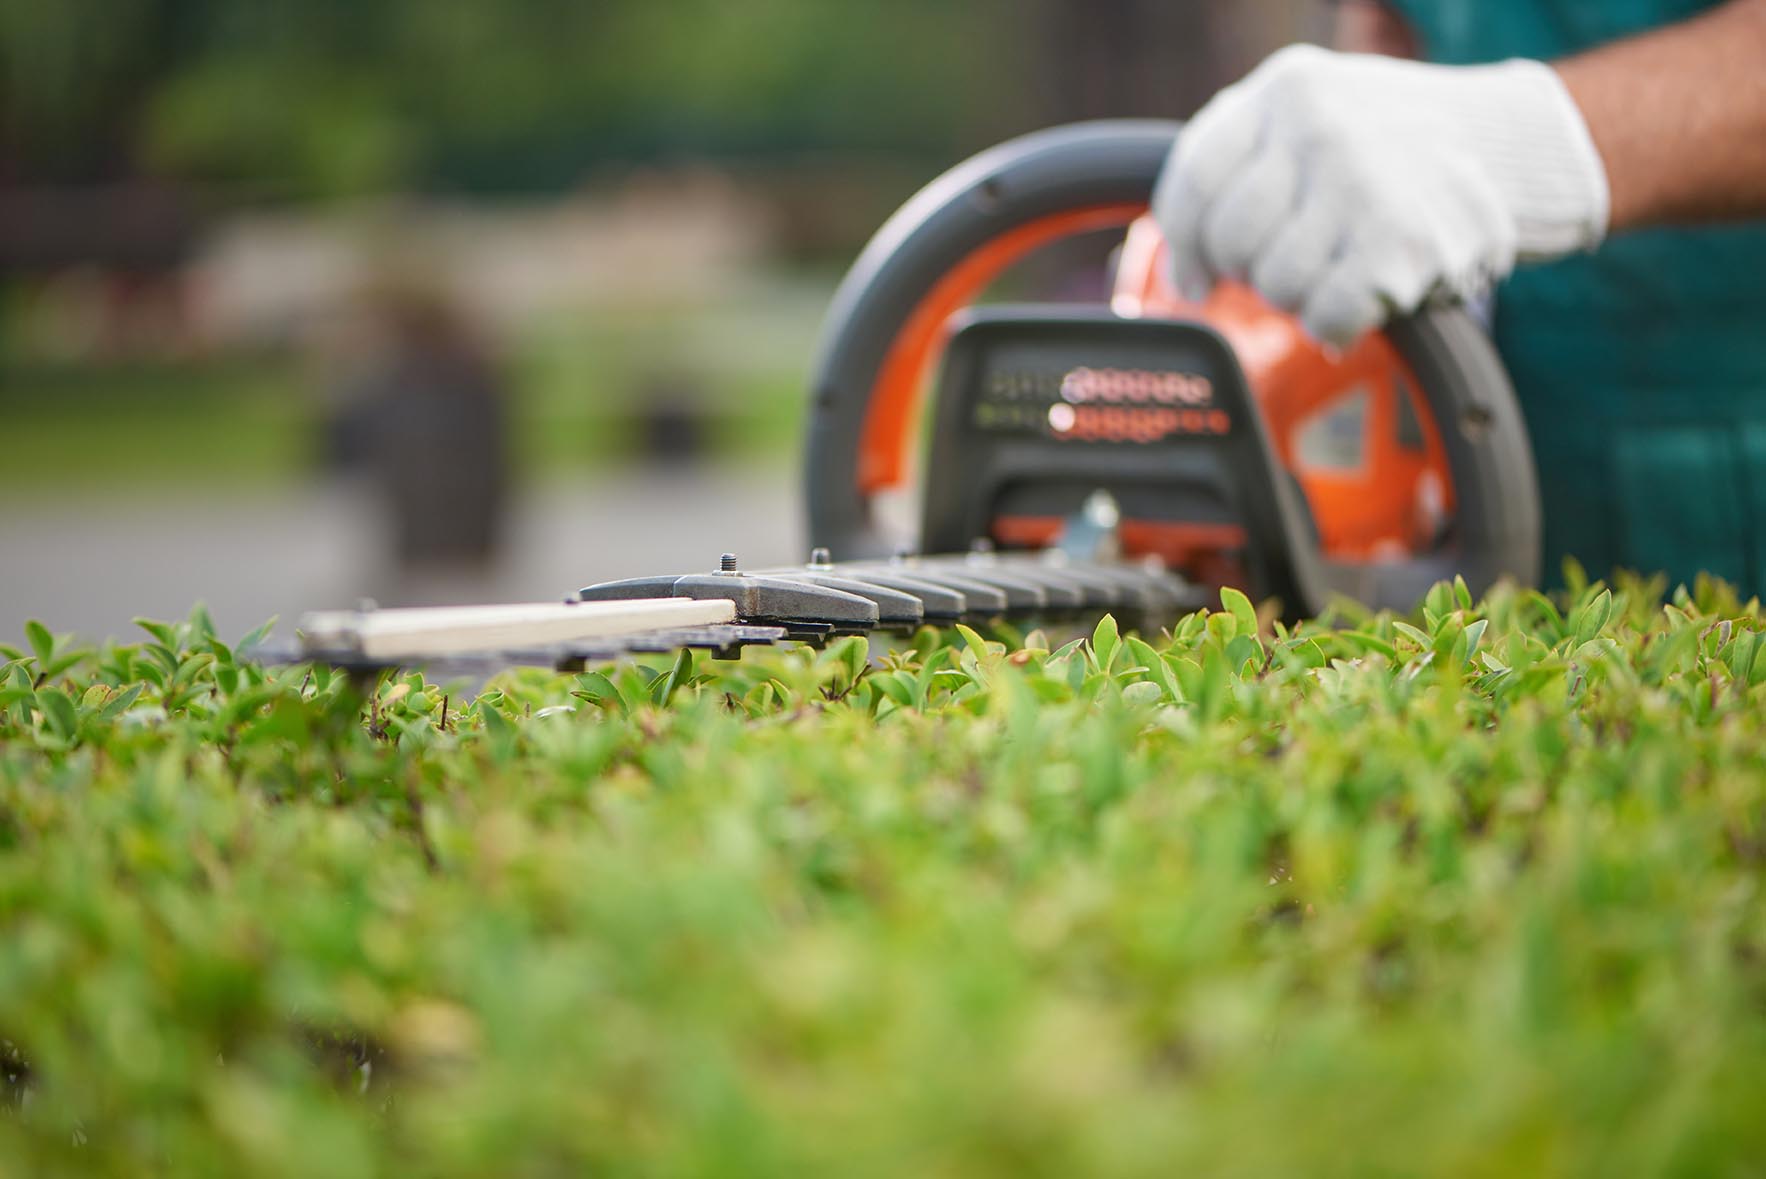 Let Lawn Mowing Service Professionals Take Care of Your Curb Appeal!